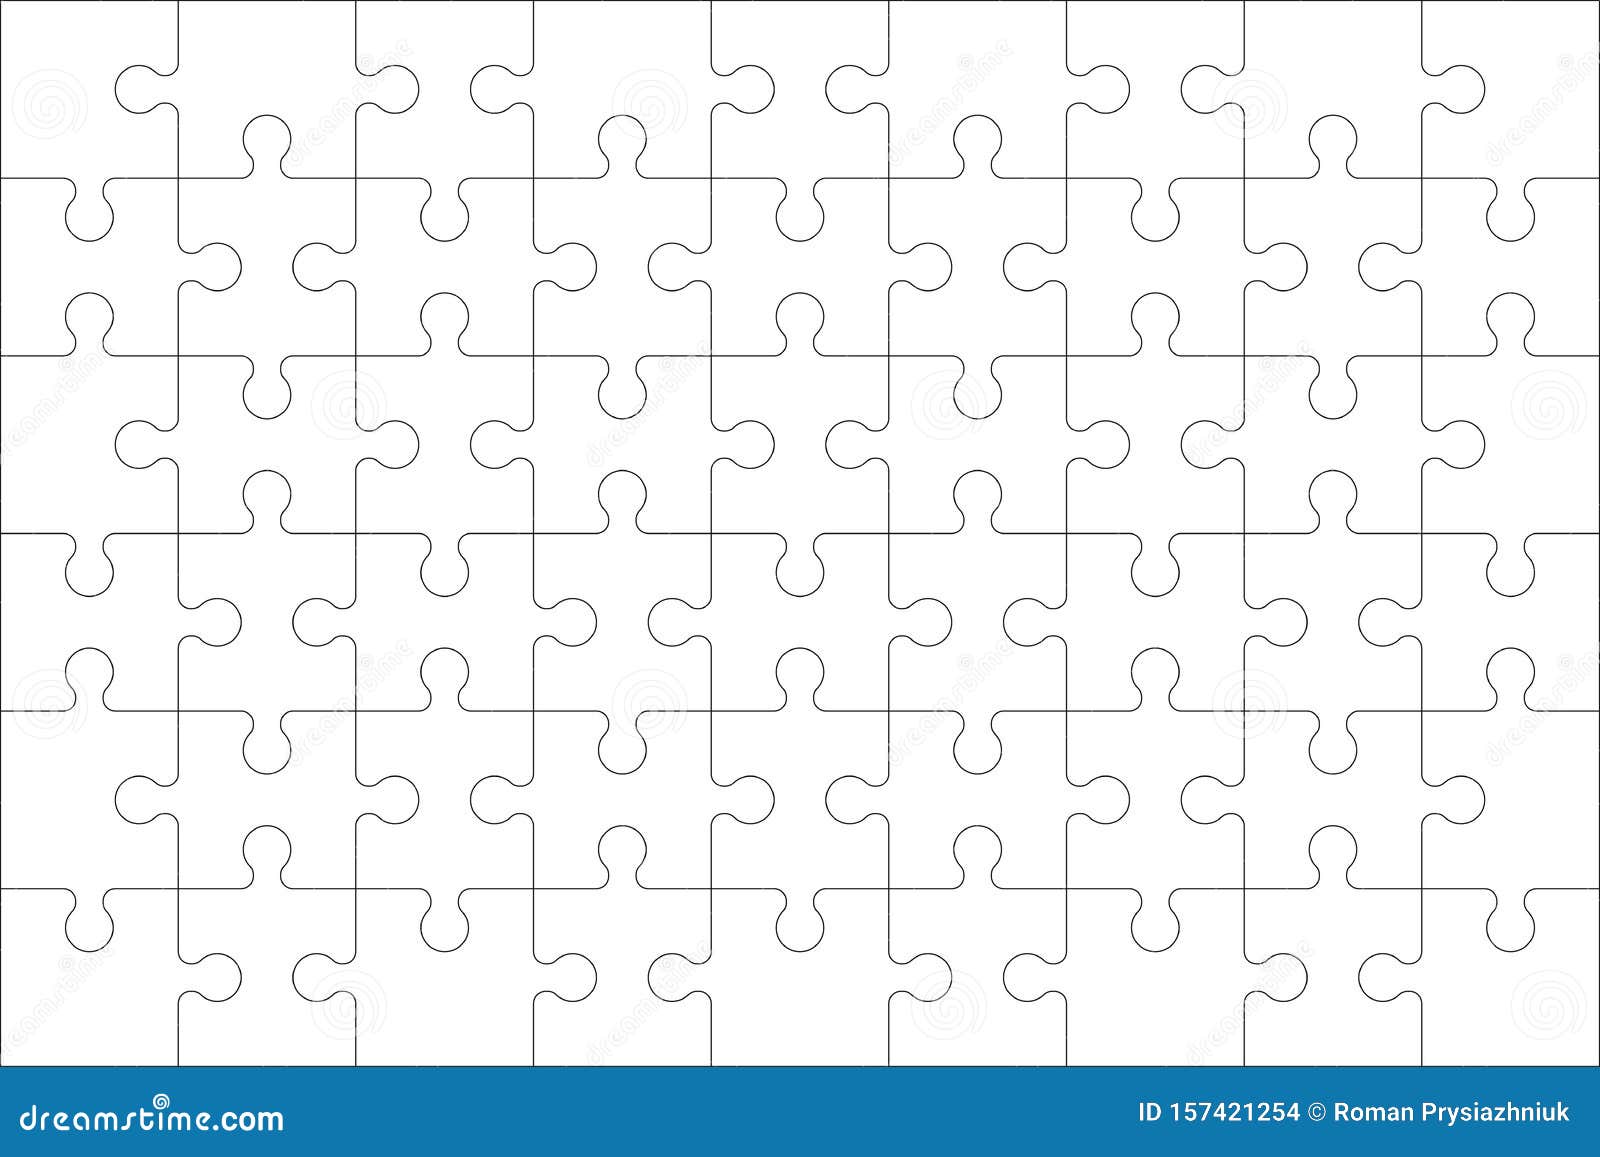 Puzzles Grid - Blank Template. Jigsaw Puzzle with 60 Pieces